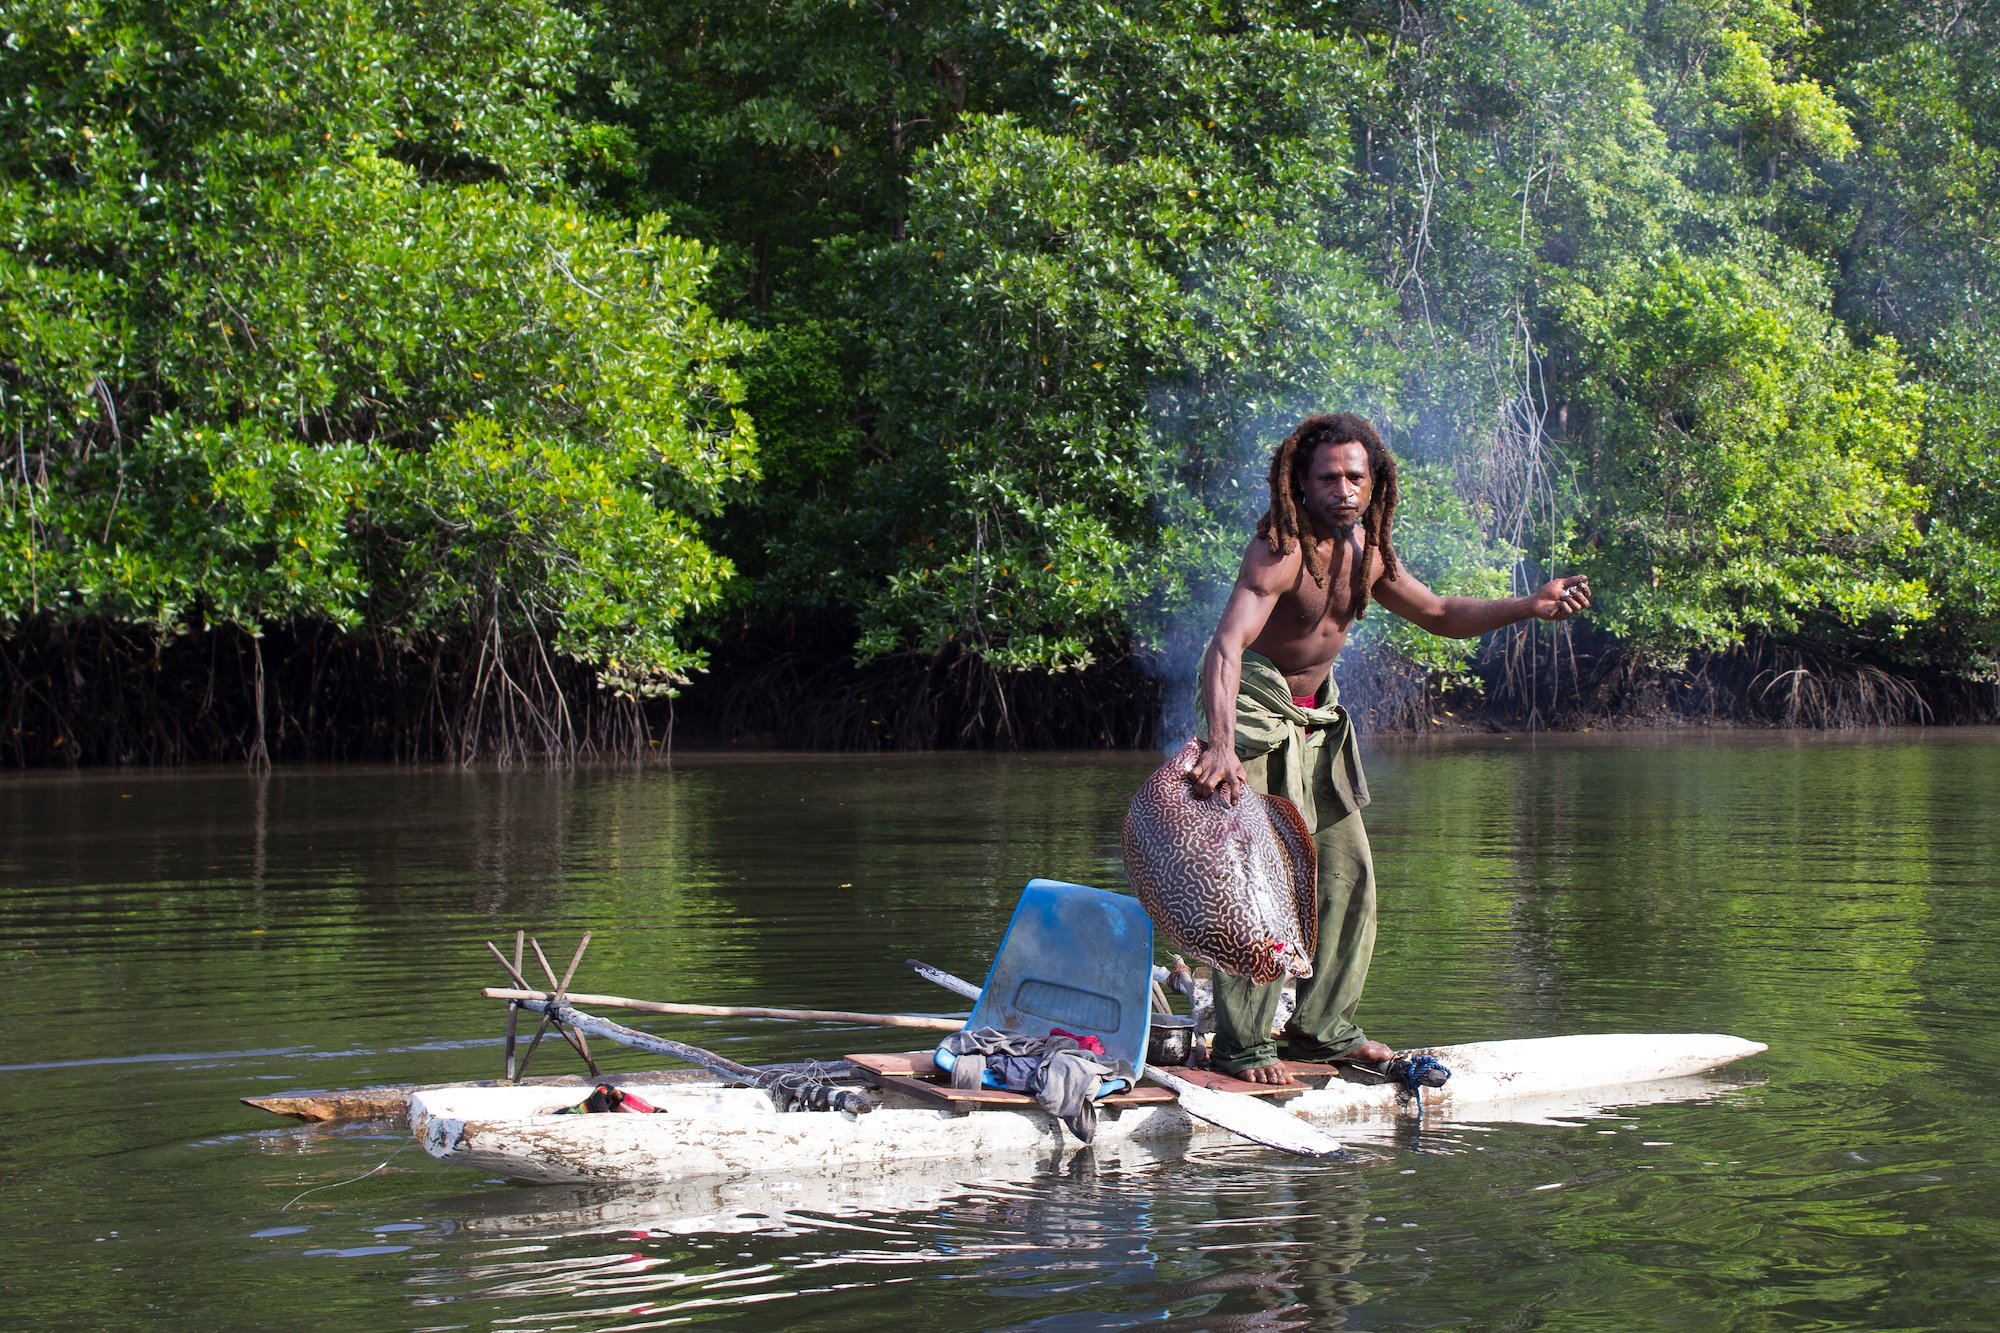 Man with long dreadlocks standing on paddle board holding large eel/fish